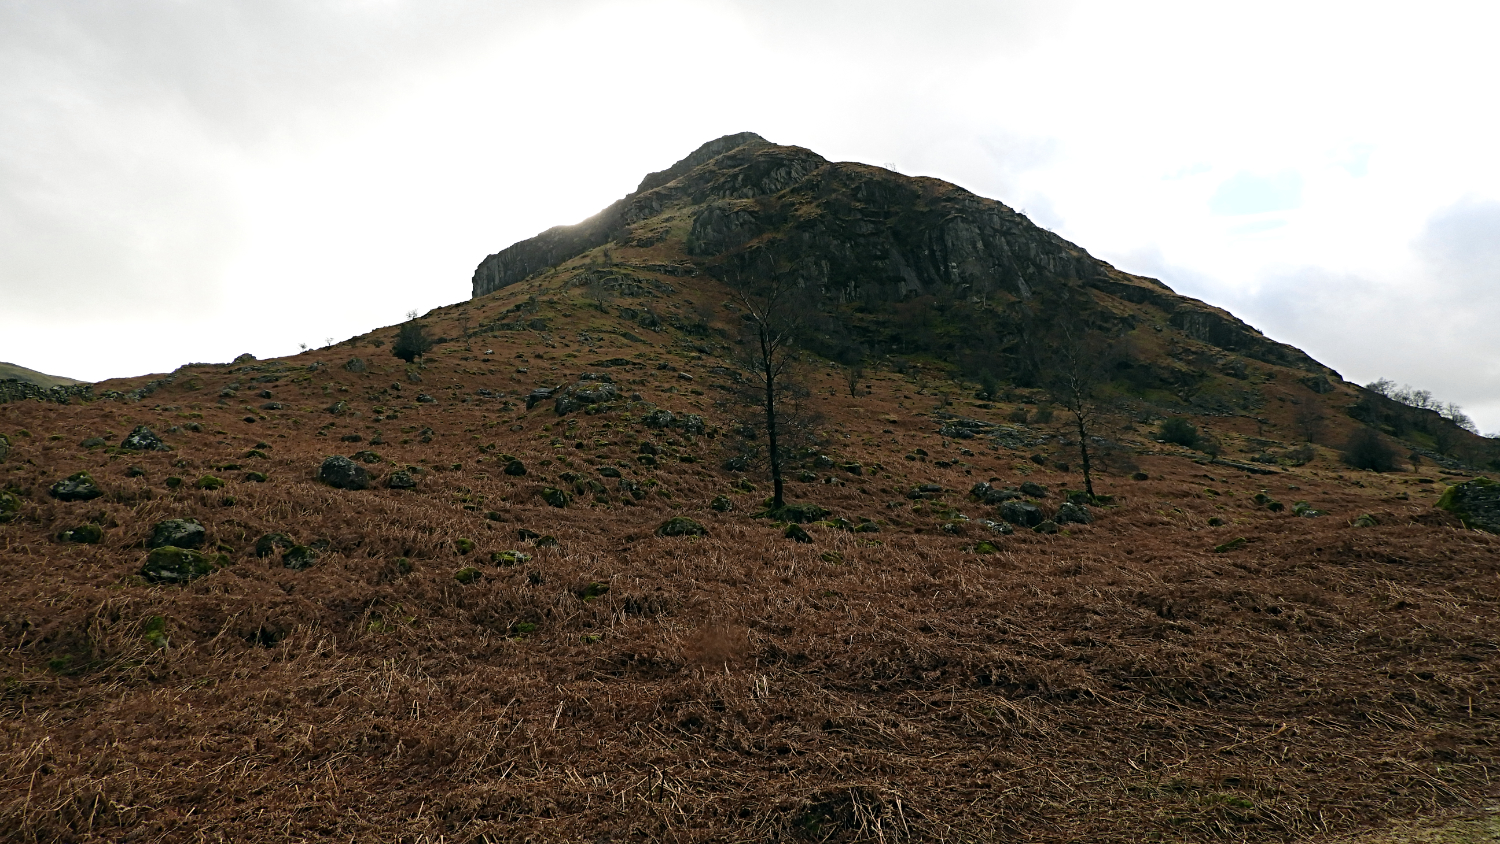 Working out my way up to Eagle Crag